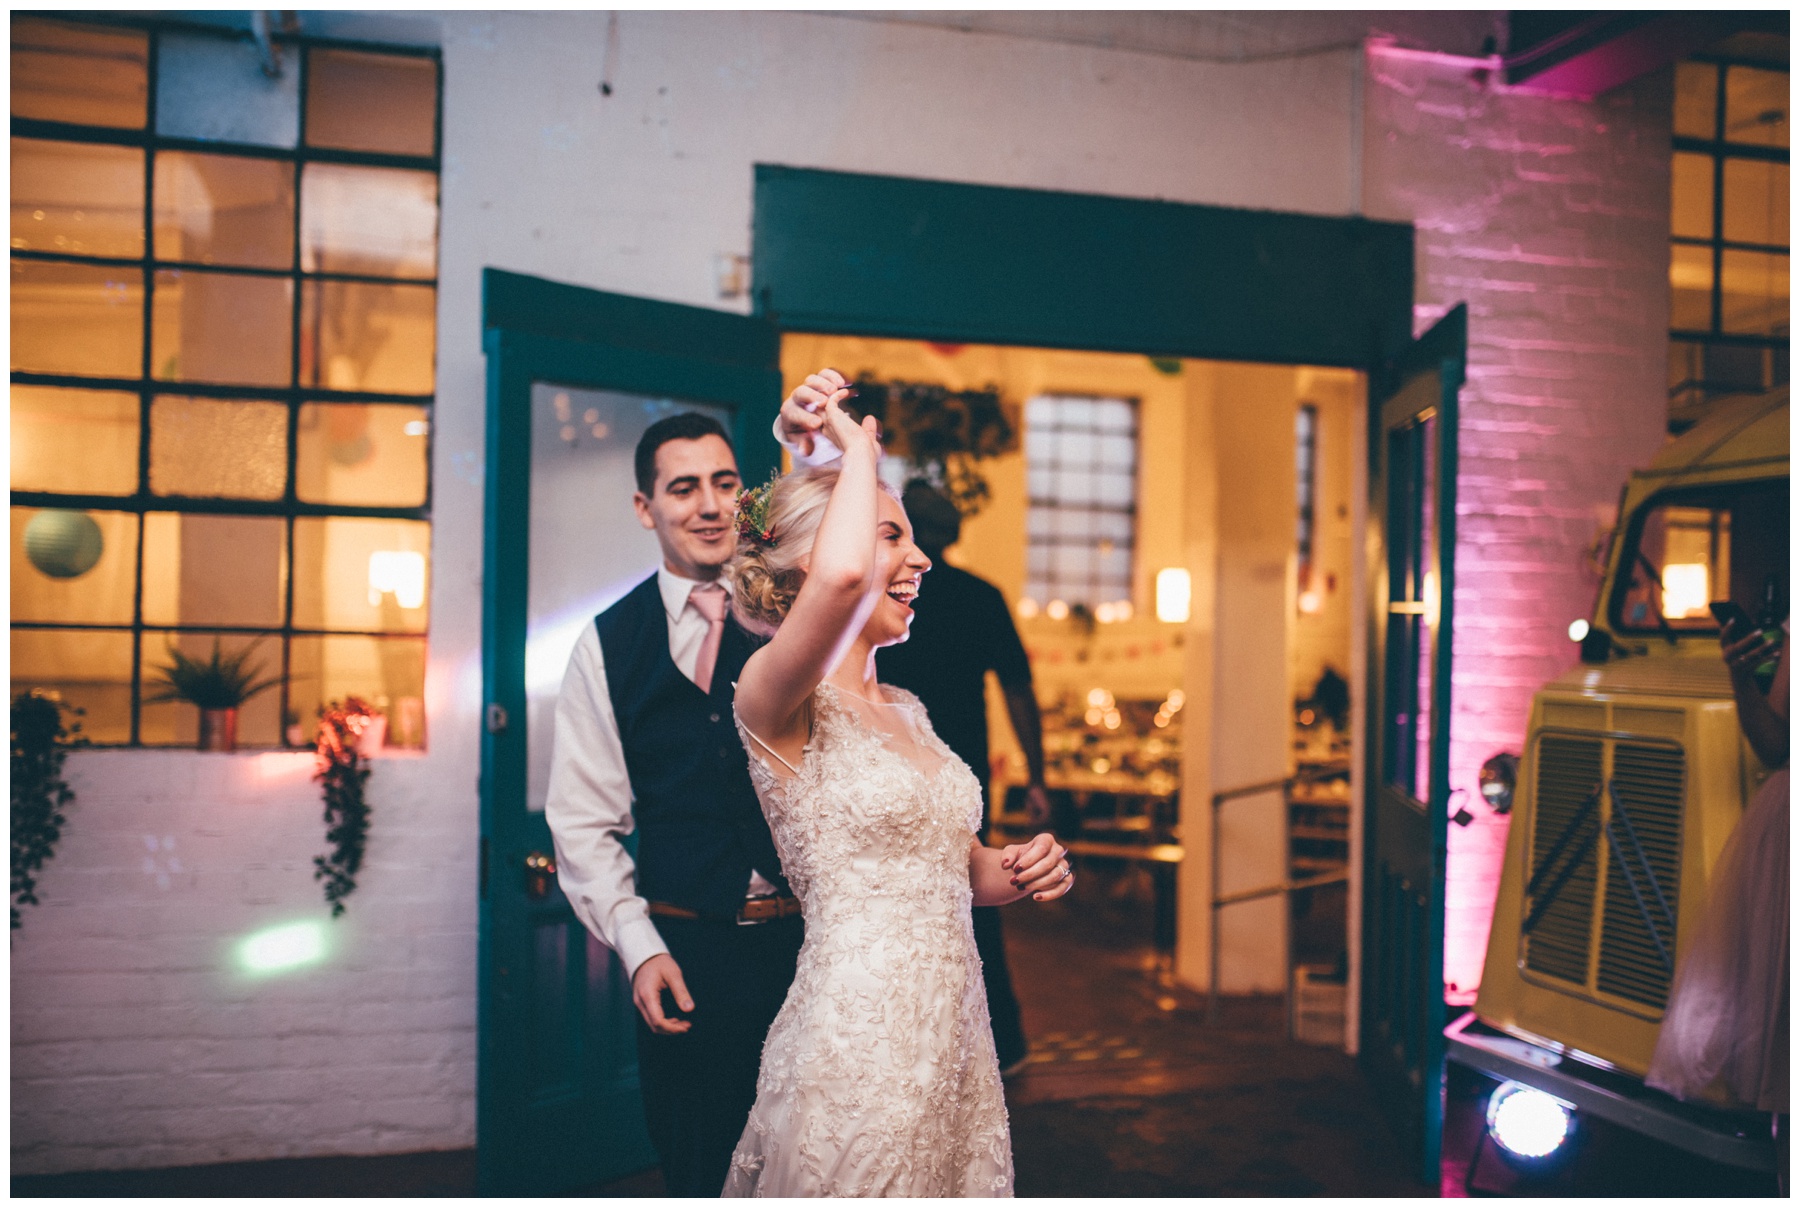 Bride and groom enjoy their First Dance at The Hide in Sheffield.